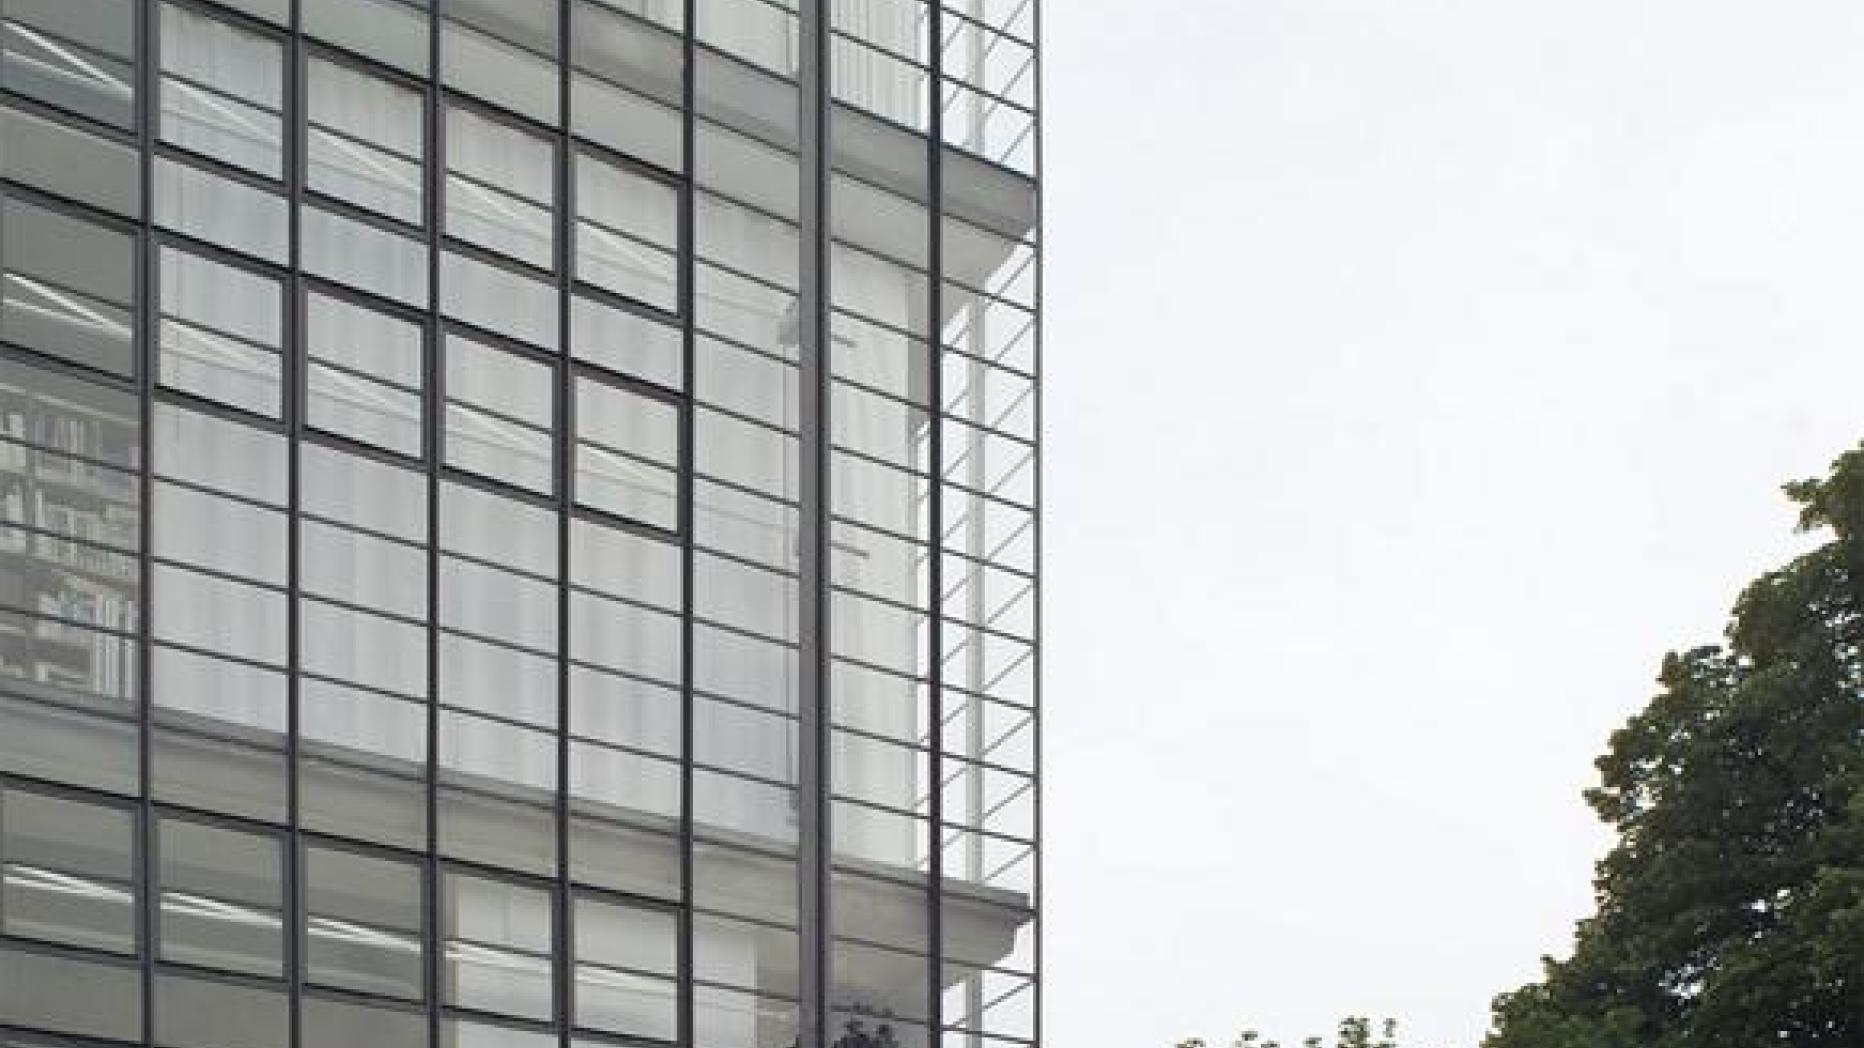 Large modernist building with grids of window panes